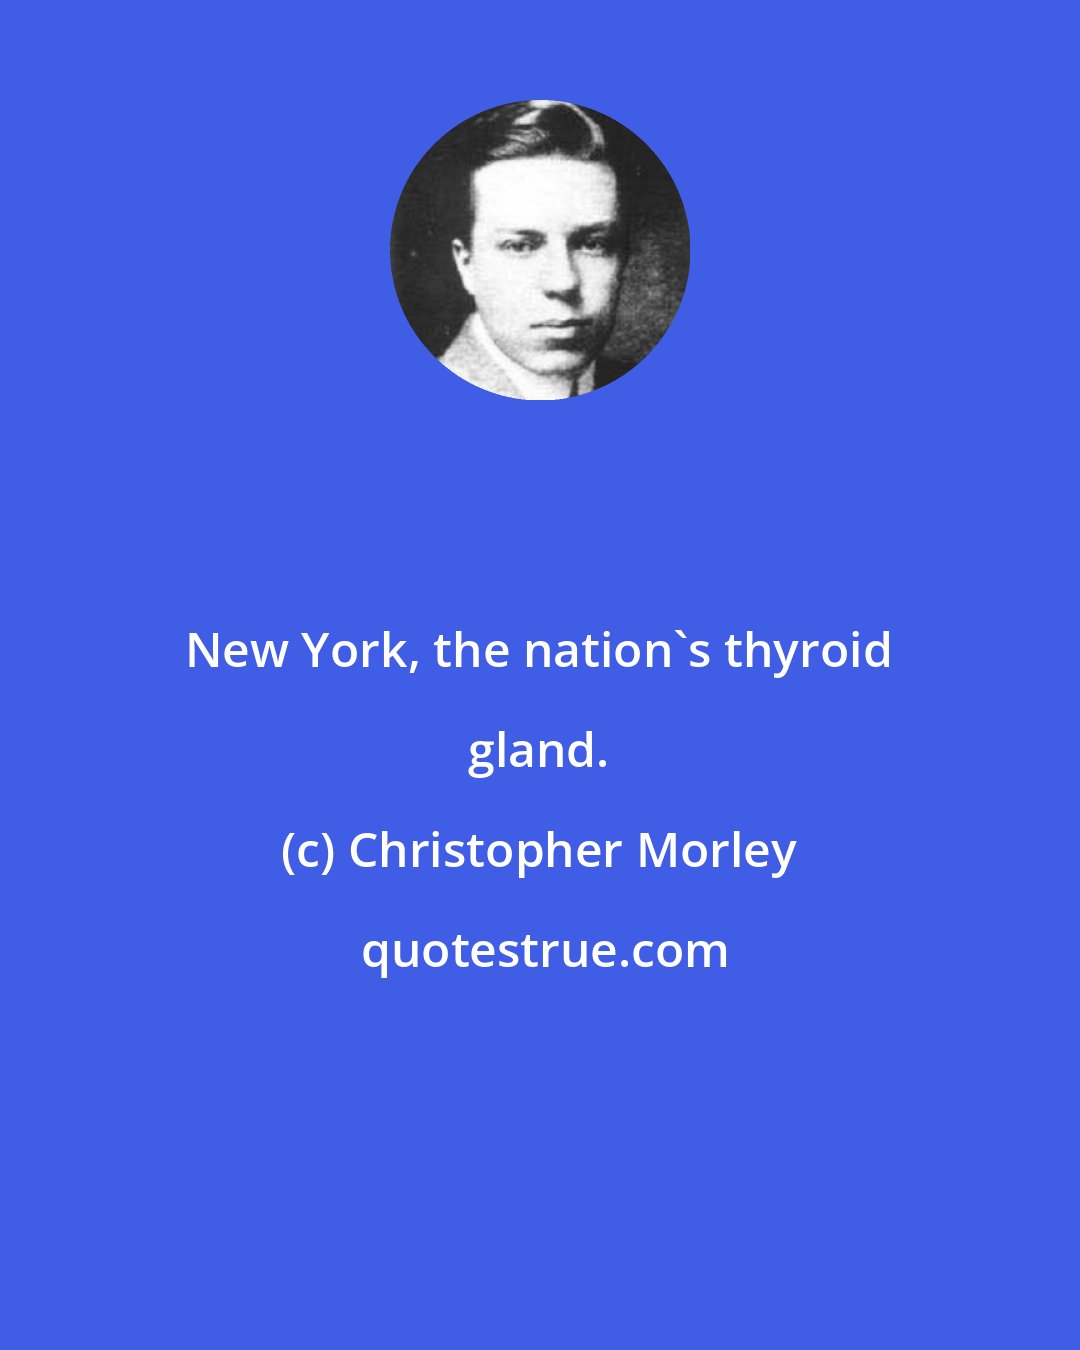 Christopher Morley: New York, the nation's thyroid gland.